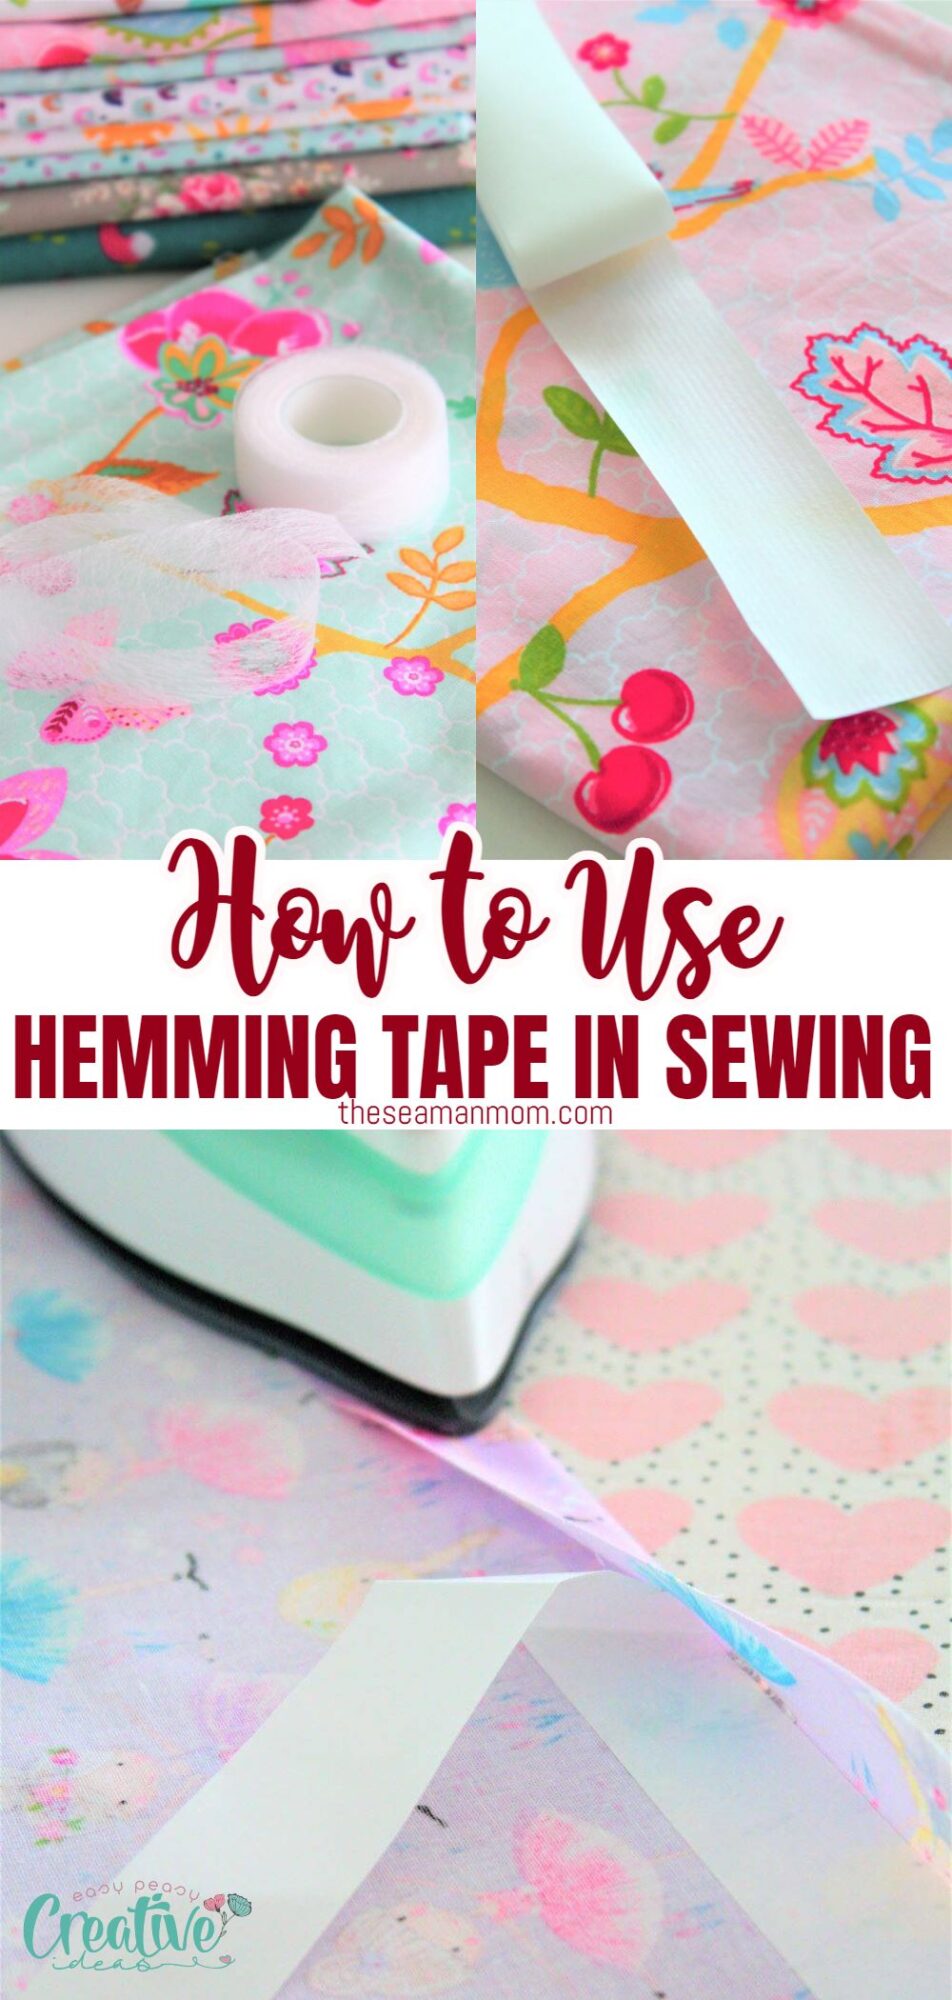 A step-by-step guide on how to use hemming tape in sewing. Learn how to easily secure hems without the need for stitching.